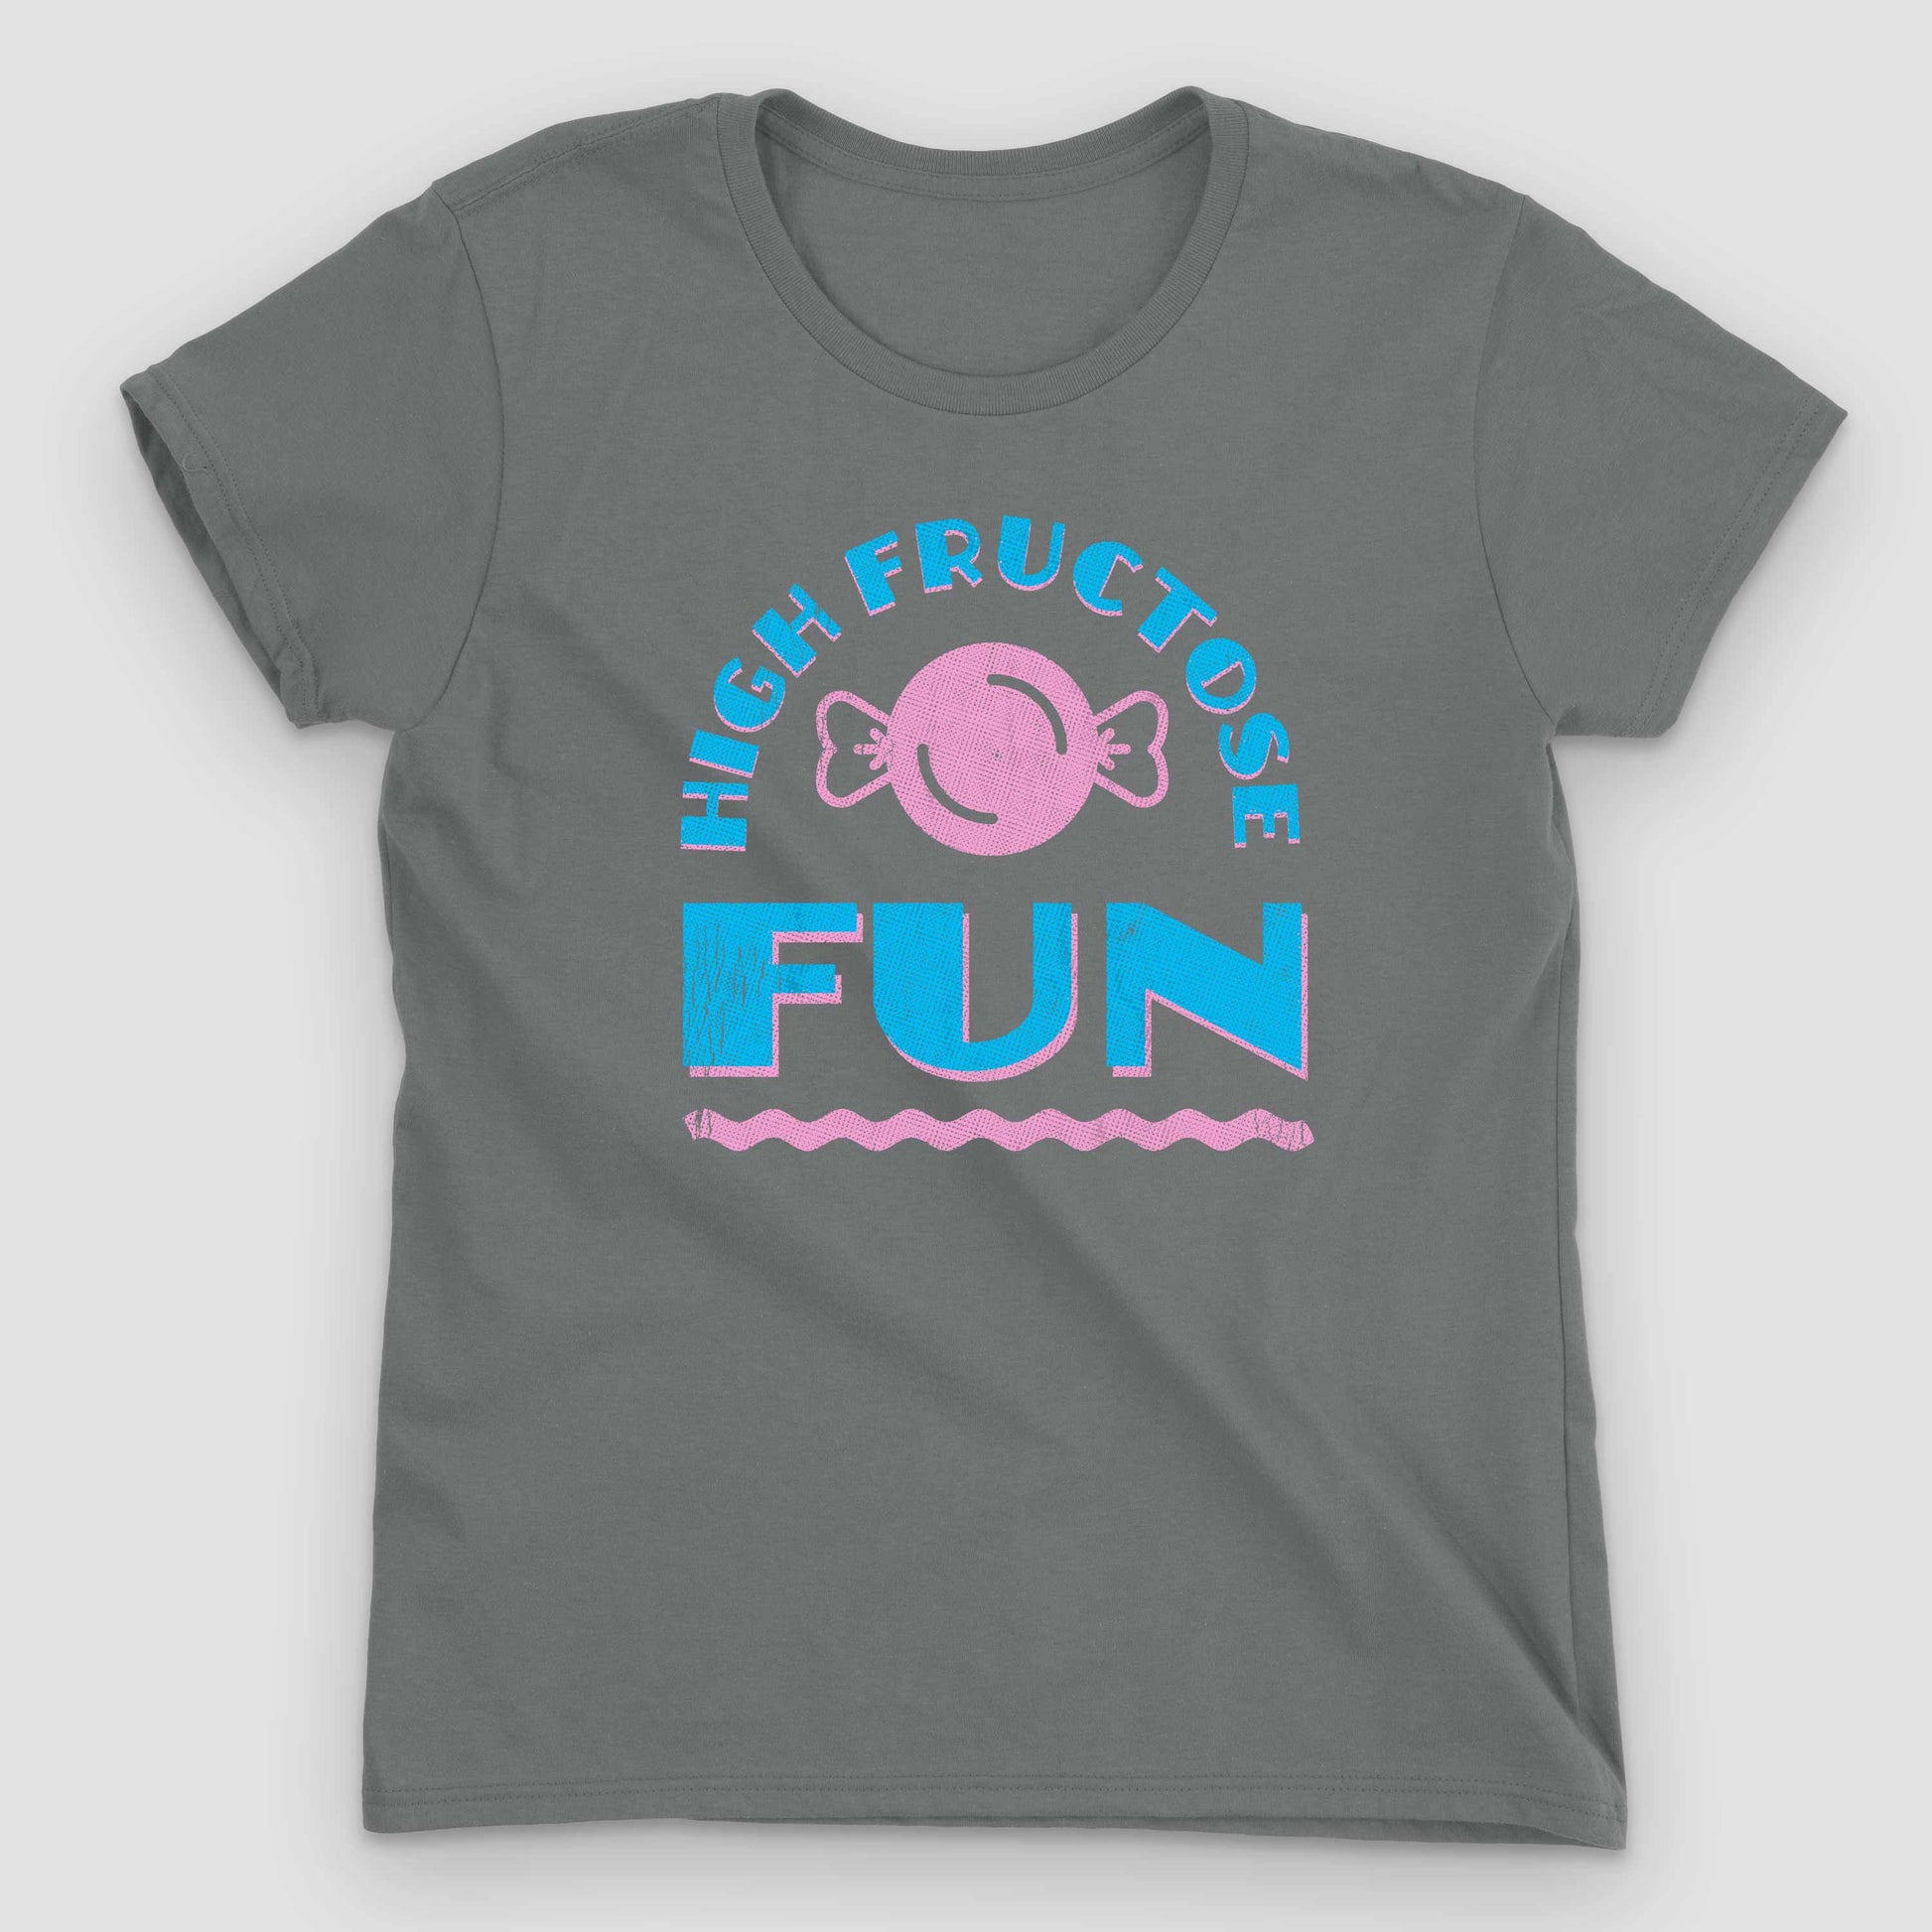 Storm Grey High Fructose Fun Women's Graphic T-Shirt by Snaxtime